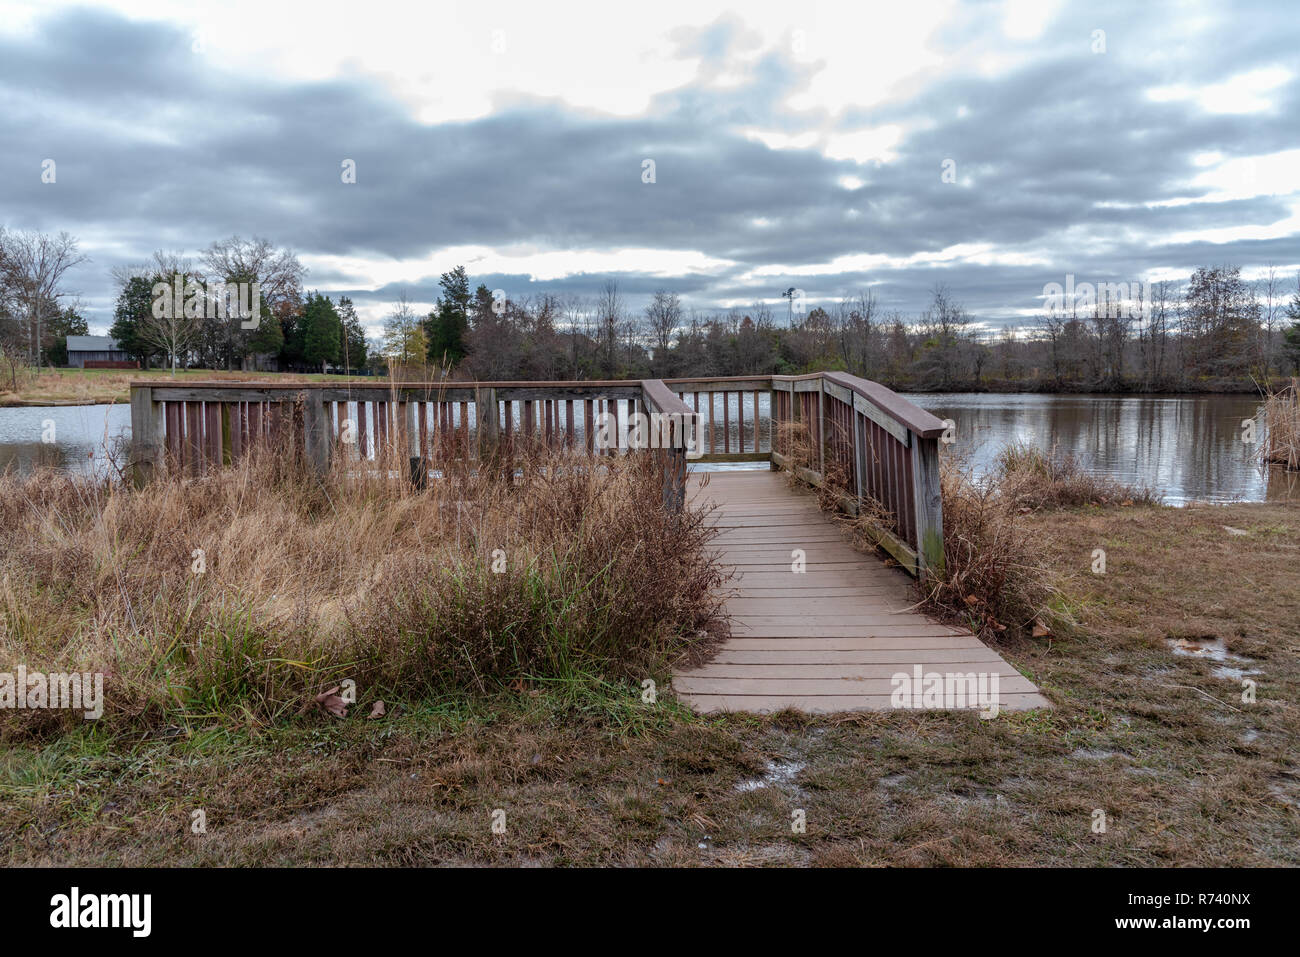 A wooden observation post looks out over a pond on a cold, wintery day; threatening skies are overhead. Stock Photo